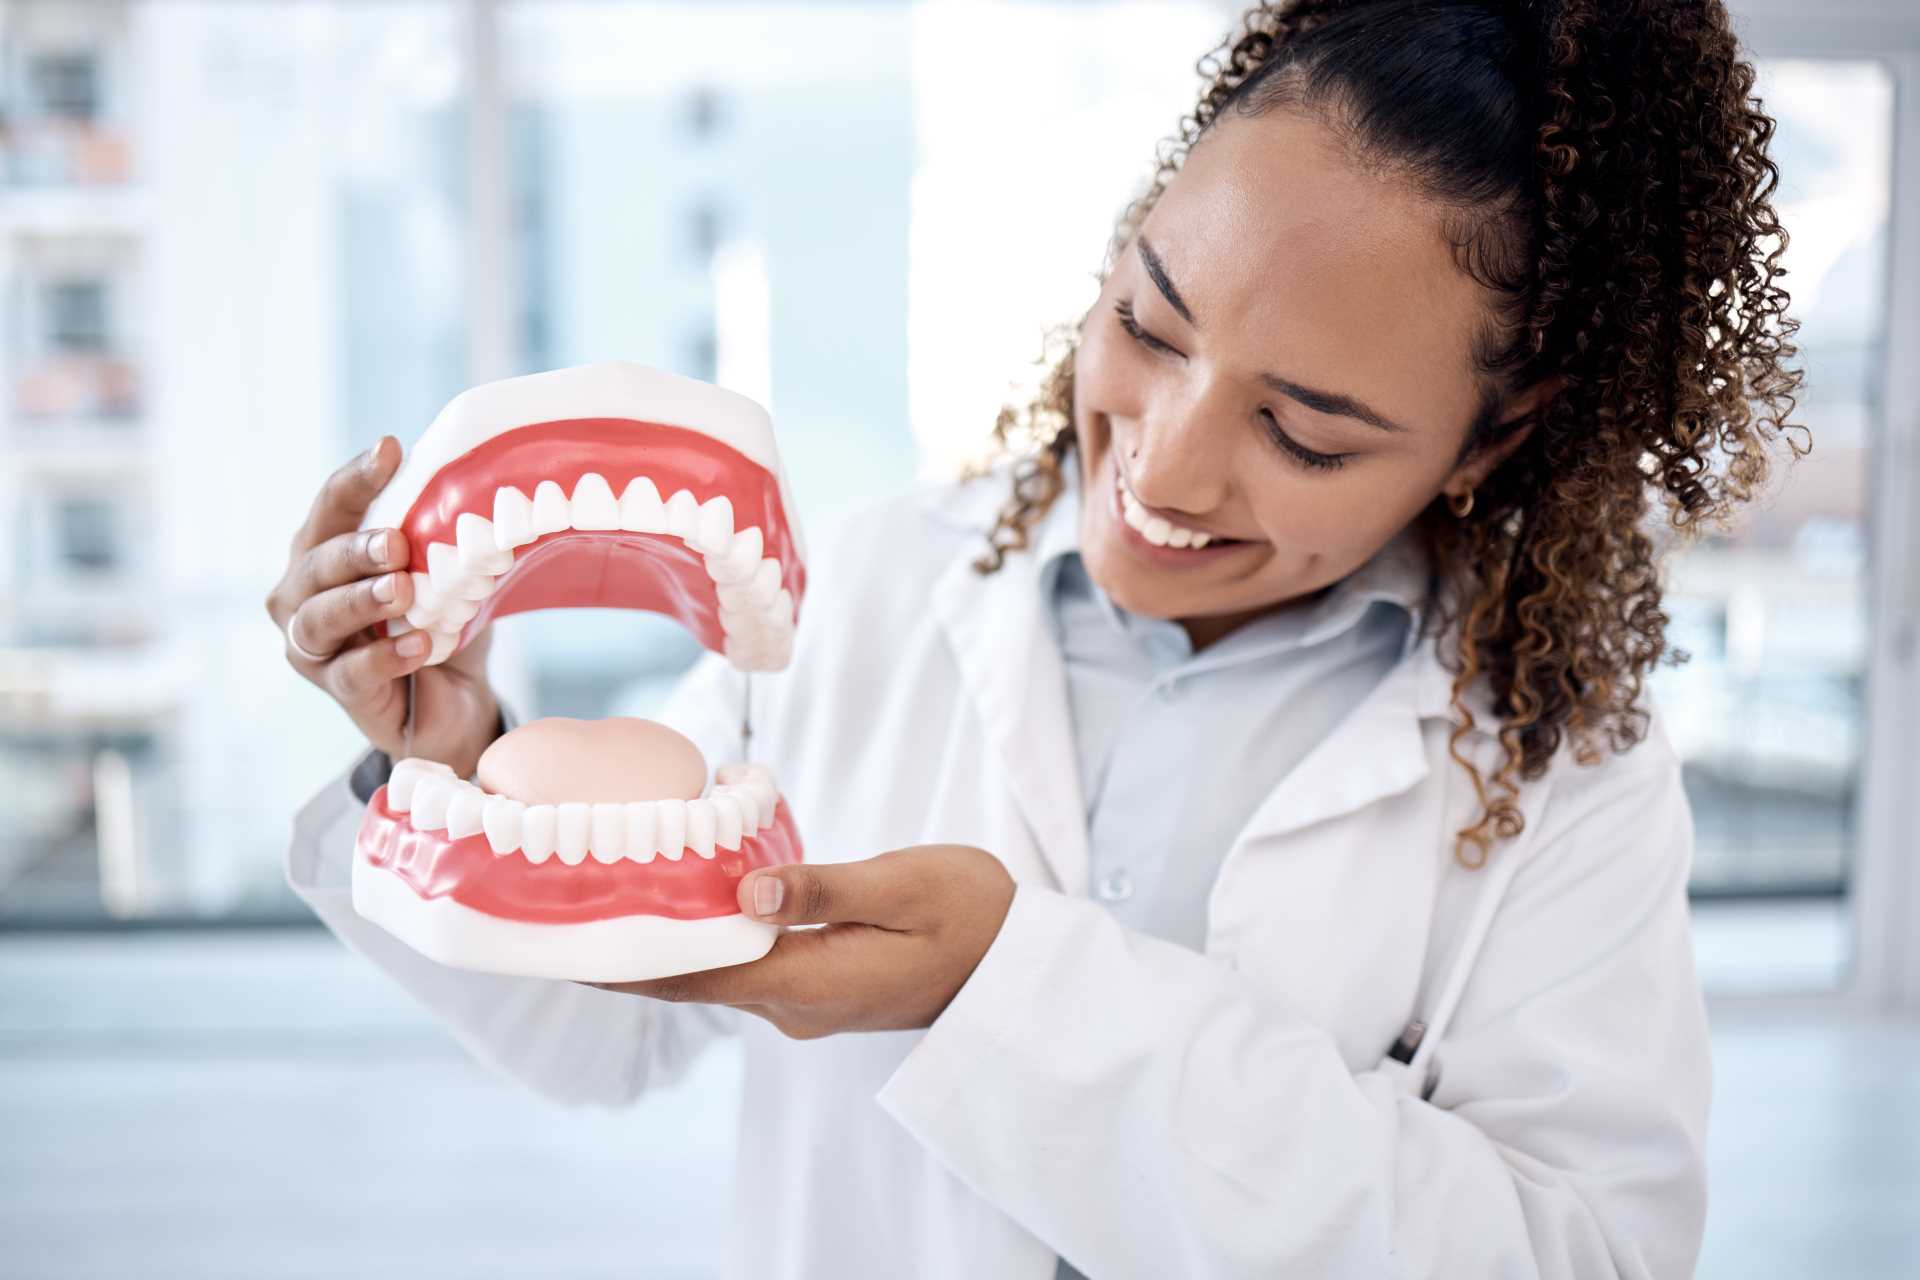 Dentist holding a large model of teeth | Featured image for the Impact of Oral Health on General Health blog by Pearl Denture Studio.